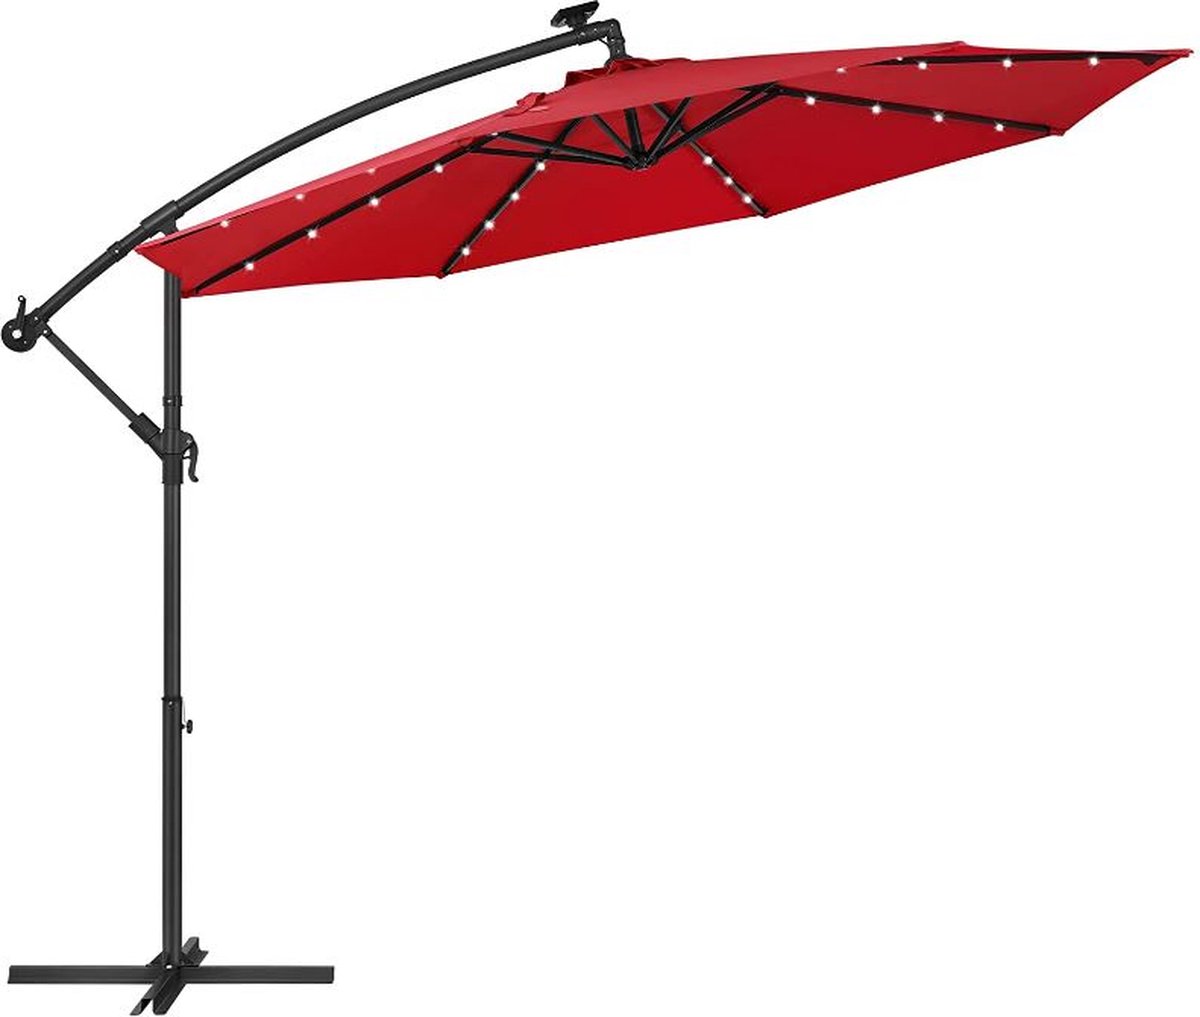 MIRA Home - Parasol - Zonnewering - Tuin - LED-verlichting - Rood - 245x300